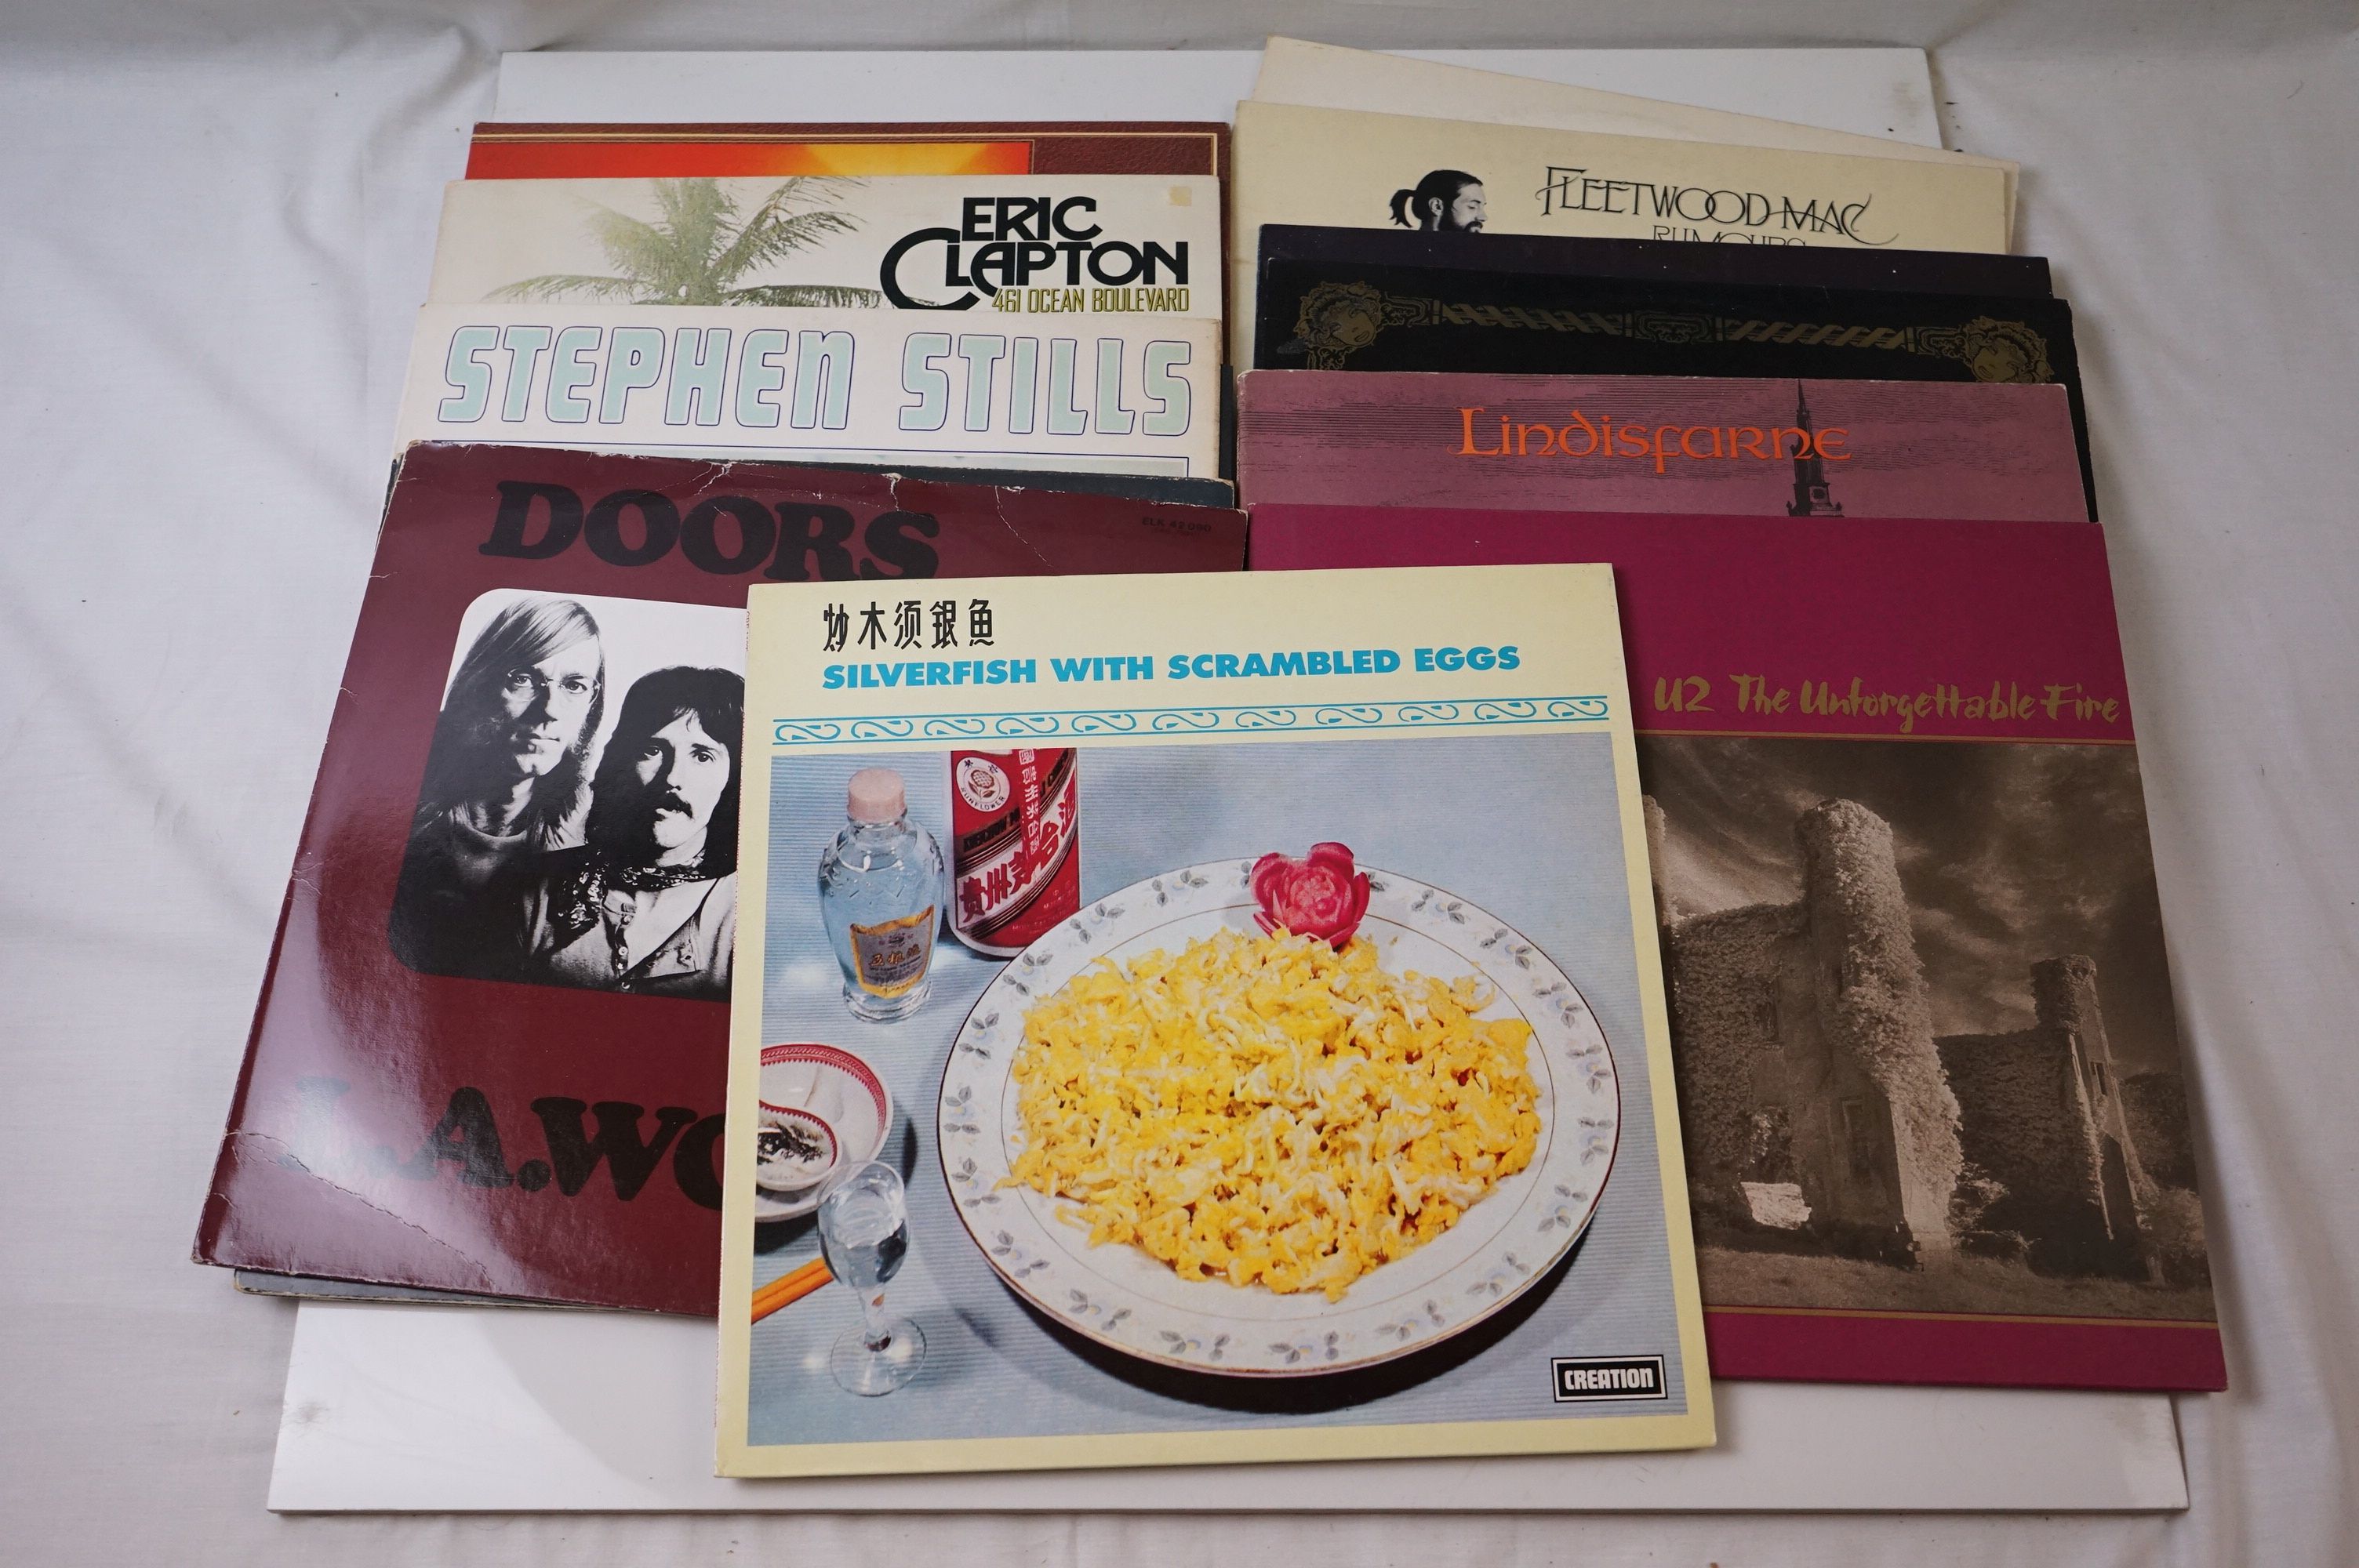 Vinyl - Rock & Pop collection of over 60 LP's to include Eric Clapton, 10cc, The Doors, Jefferson - Image 3 of 5